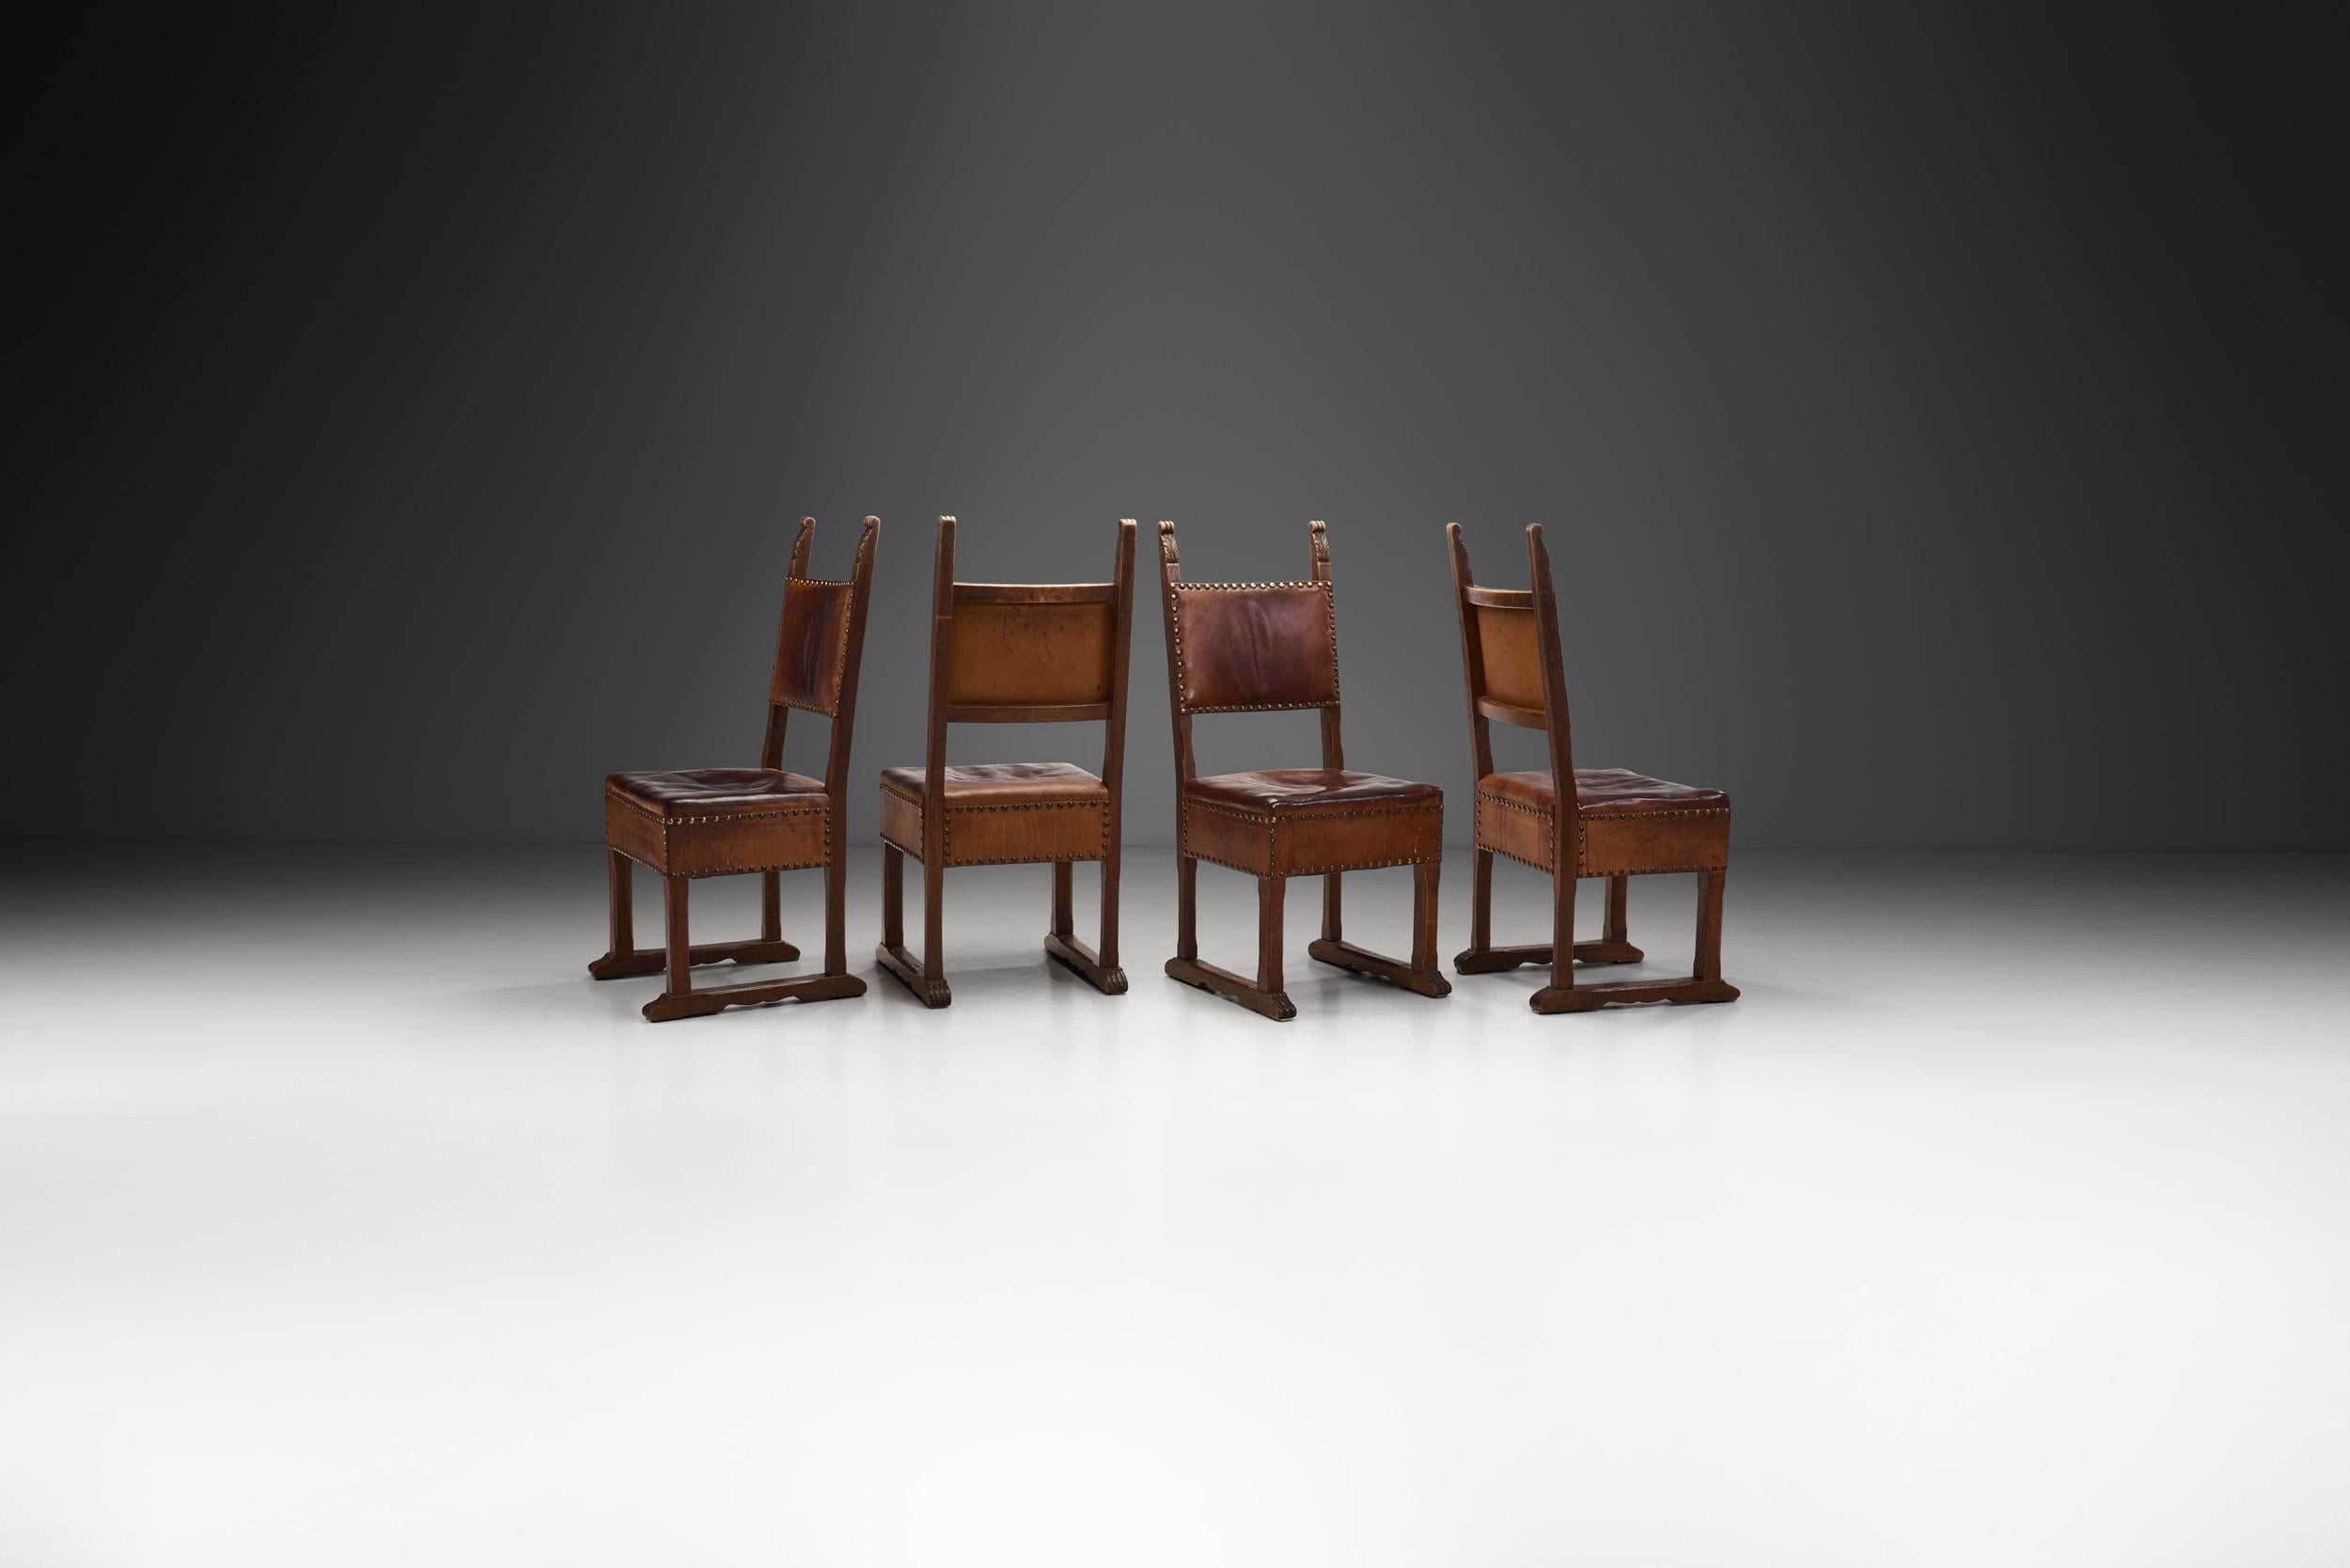 Baroque Revival European Patinated Oak and Leather Chairs with Upholstery Tacks, Europe Ca 1900s